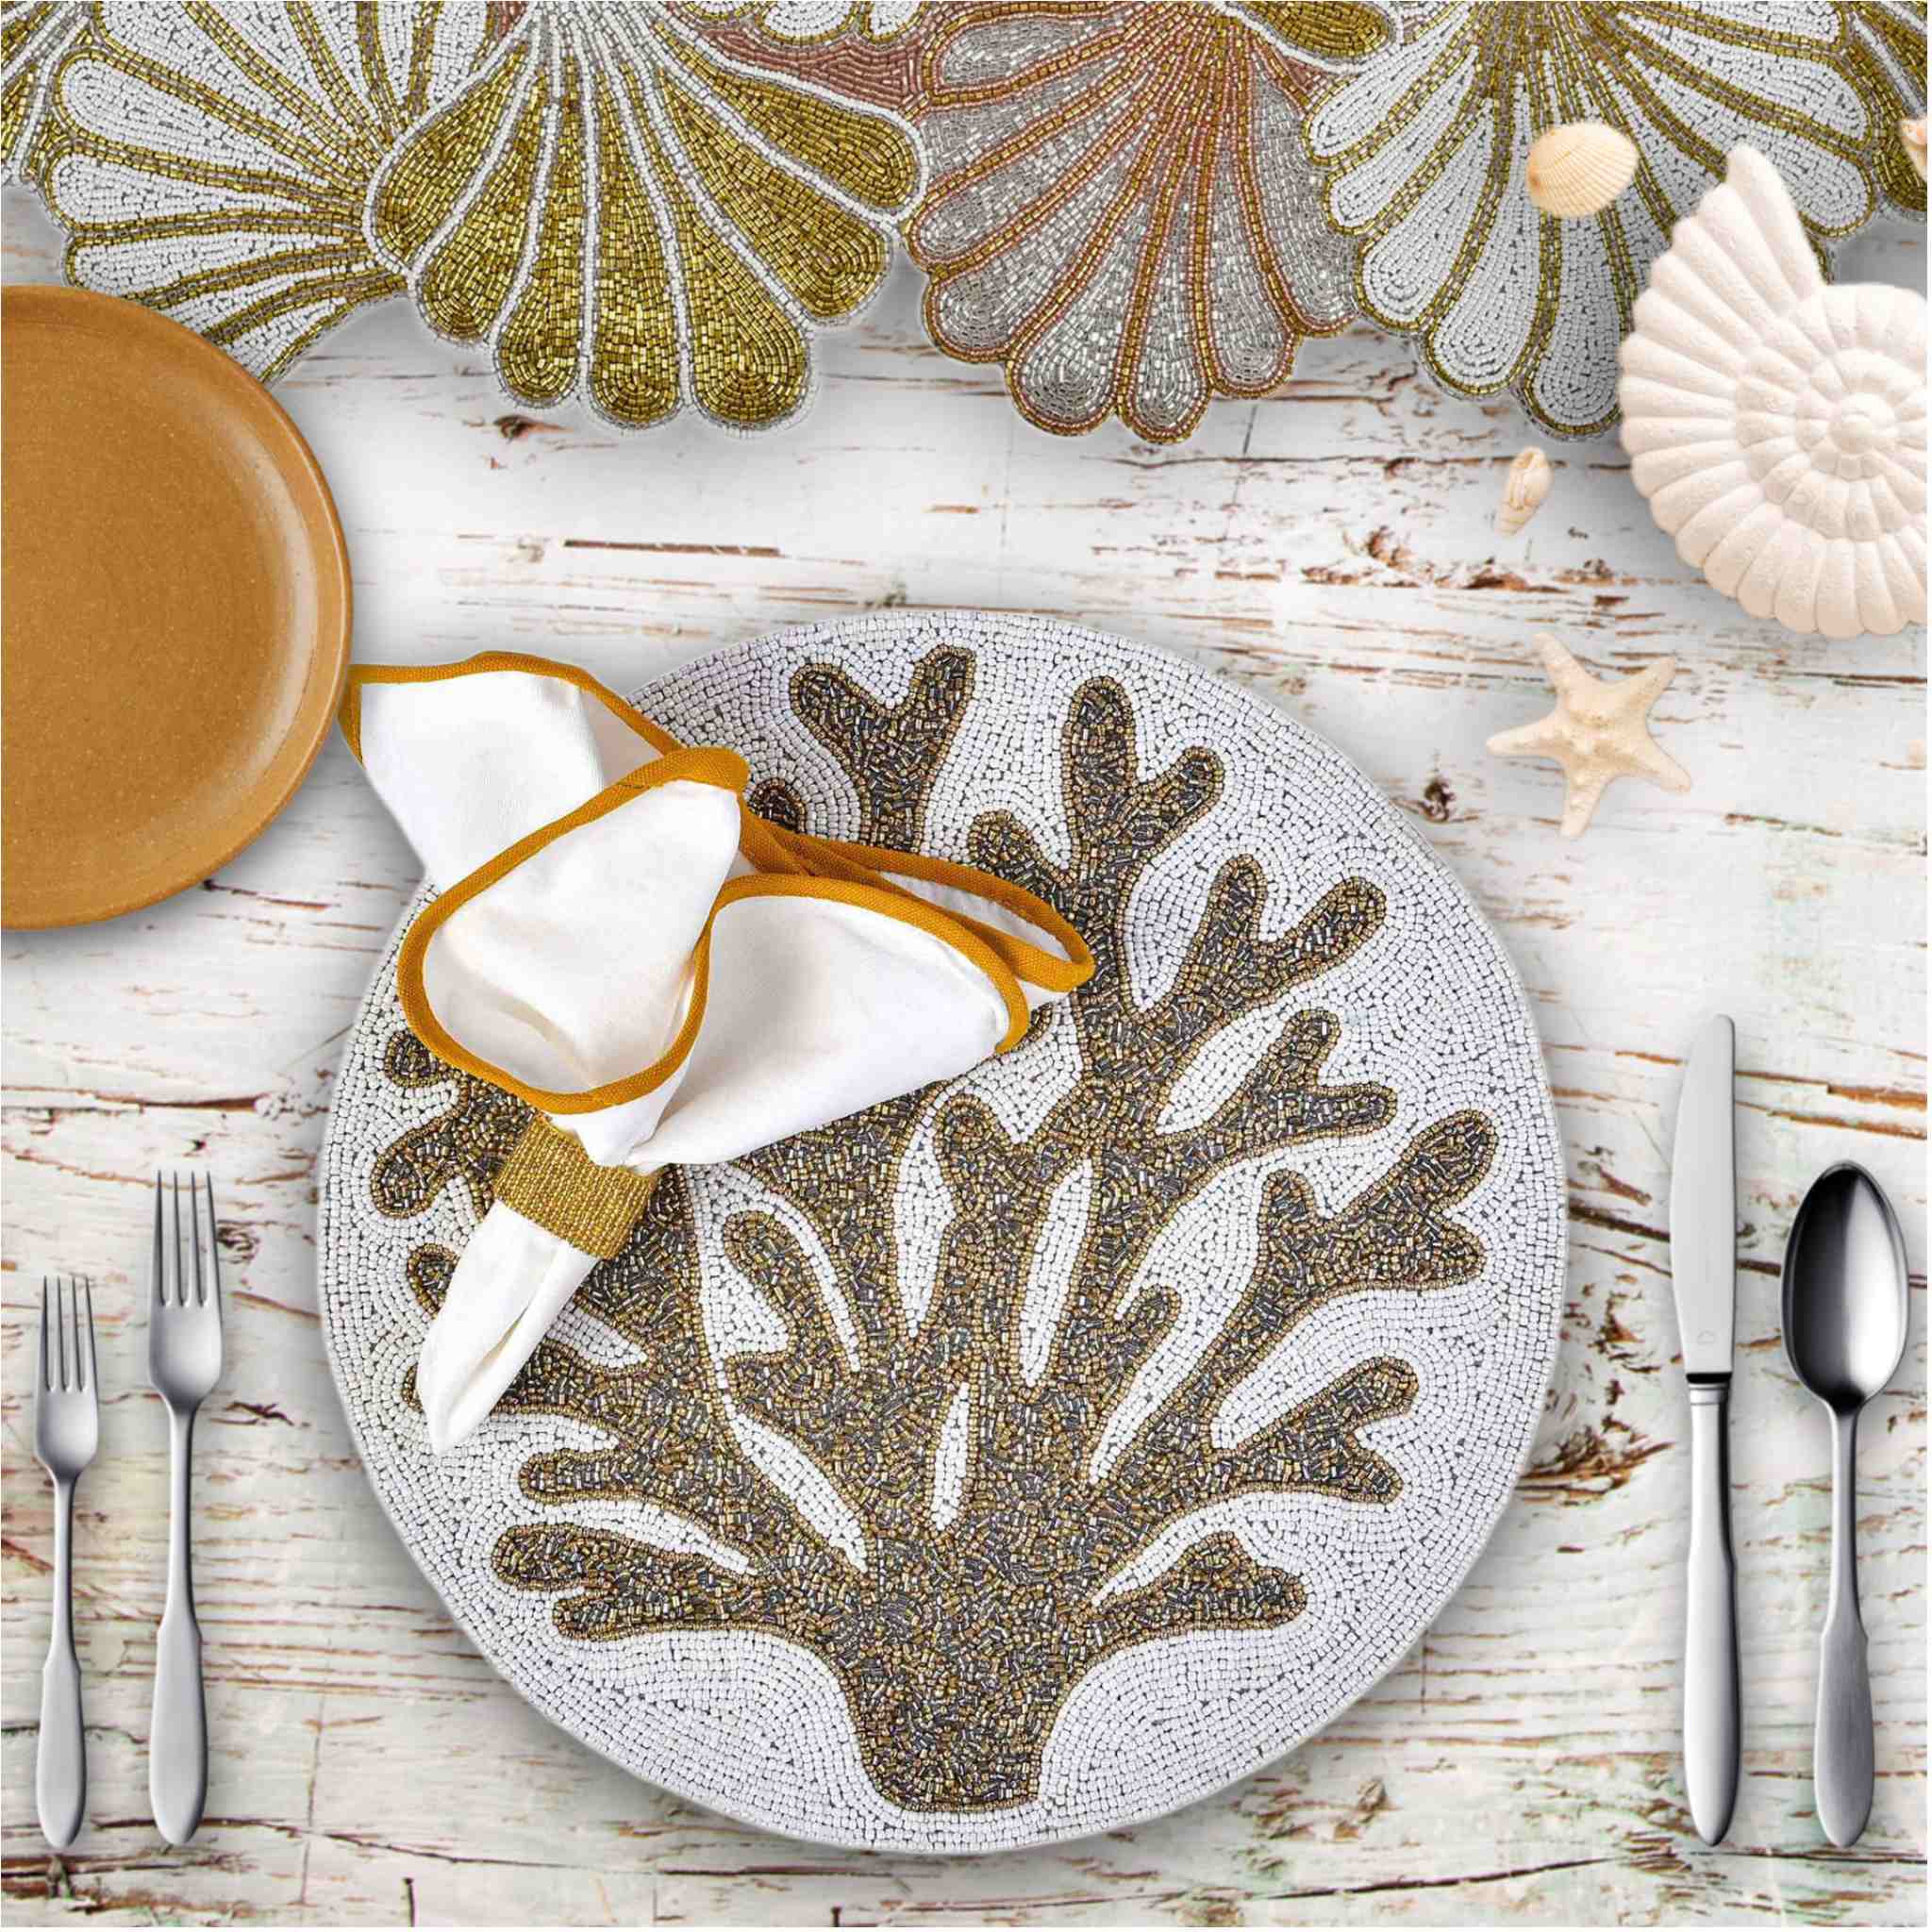 Sea La Vie Table Setting for 4 - Embroidered Placemats, Napkin Rings & Table Runner in Cream & Gold